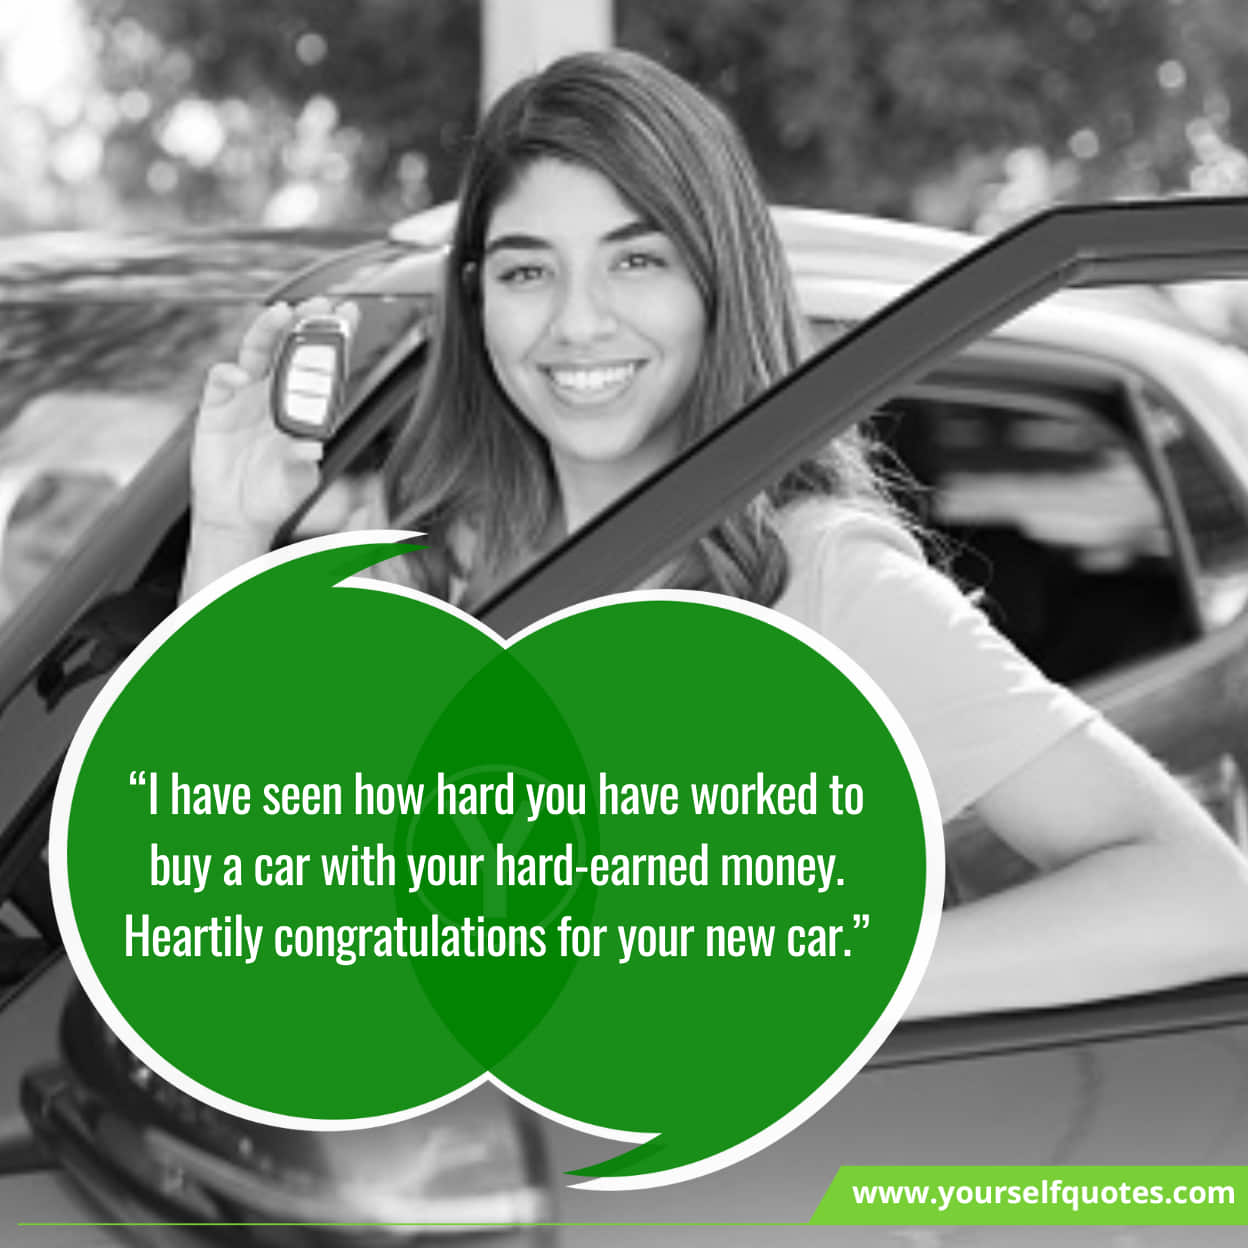 New Car Buying Congratulation Messages